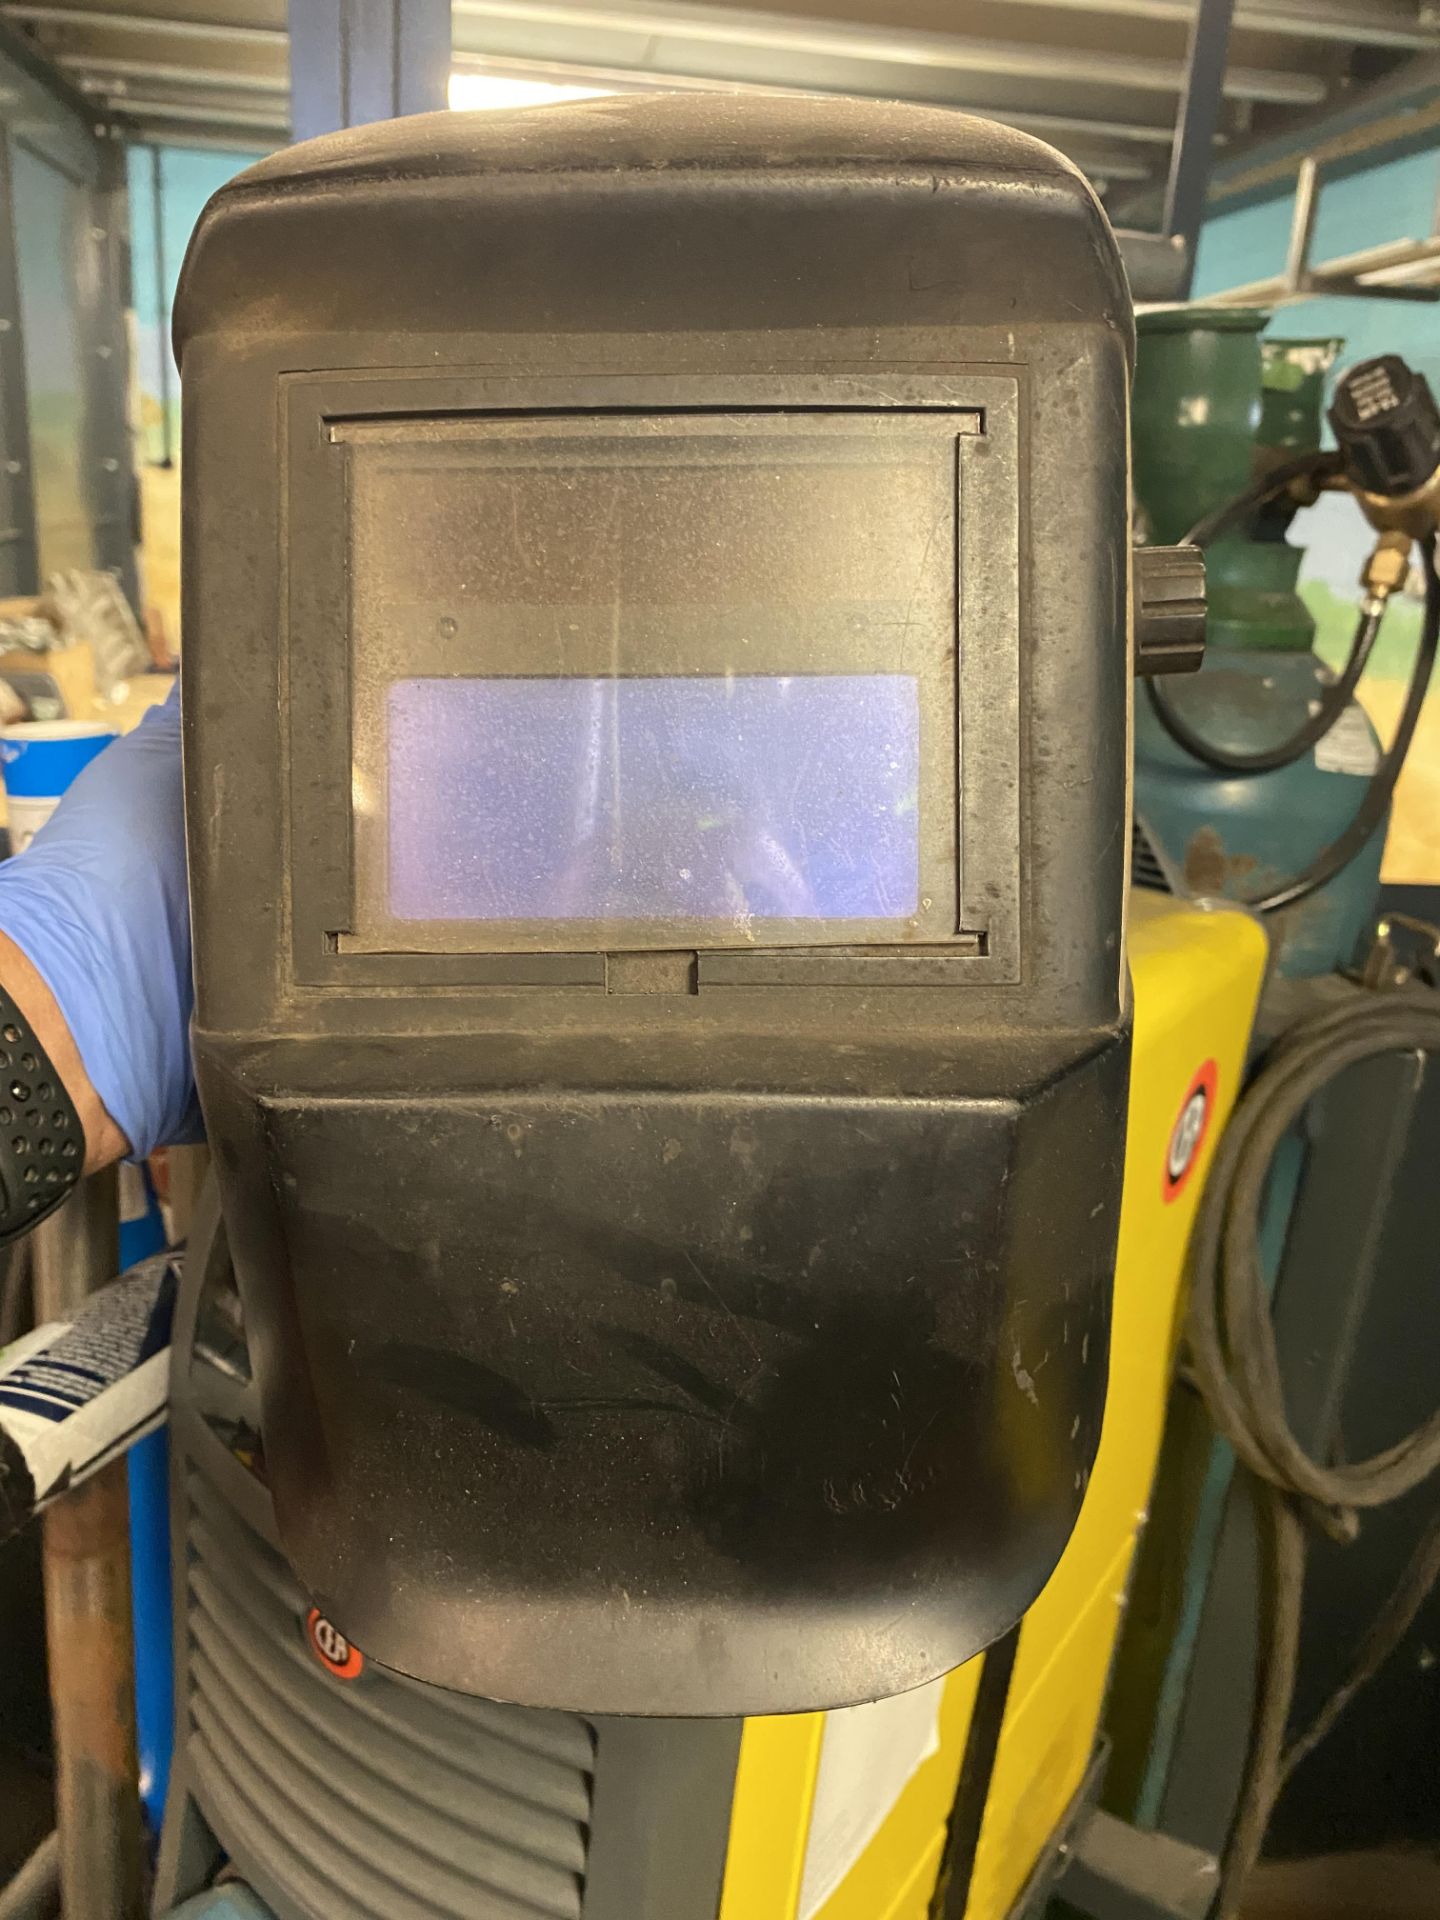 CEA Matrix 3000 AC/DC Welder, Serial No.JD072012 with Wurth Welding Helment, Welding Wire as shown - Image 23 of 31